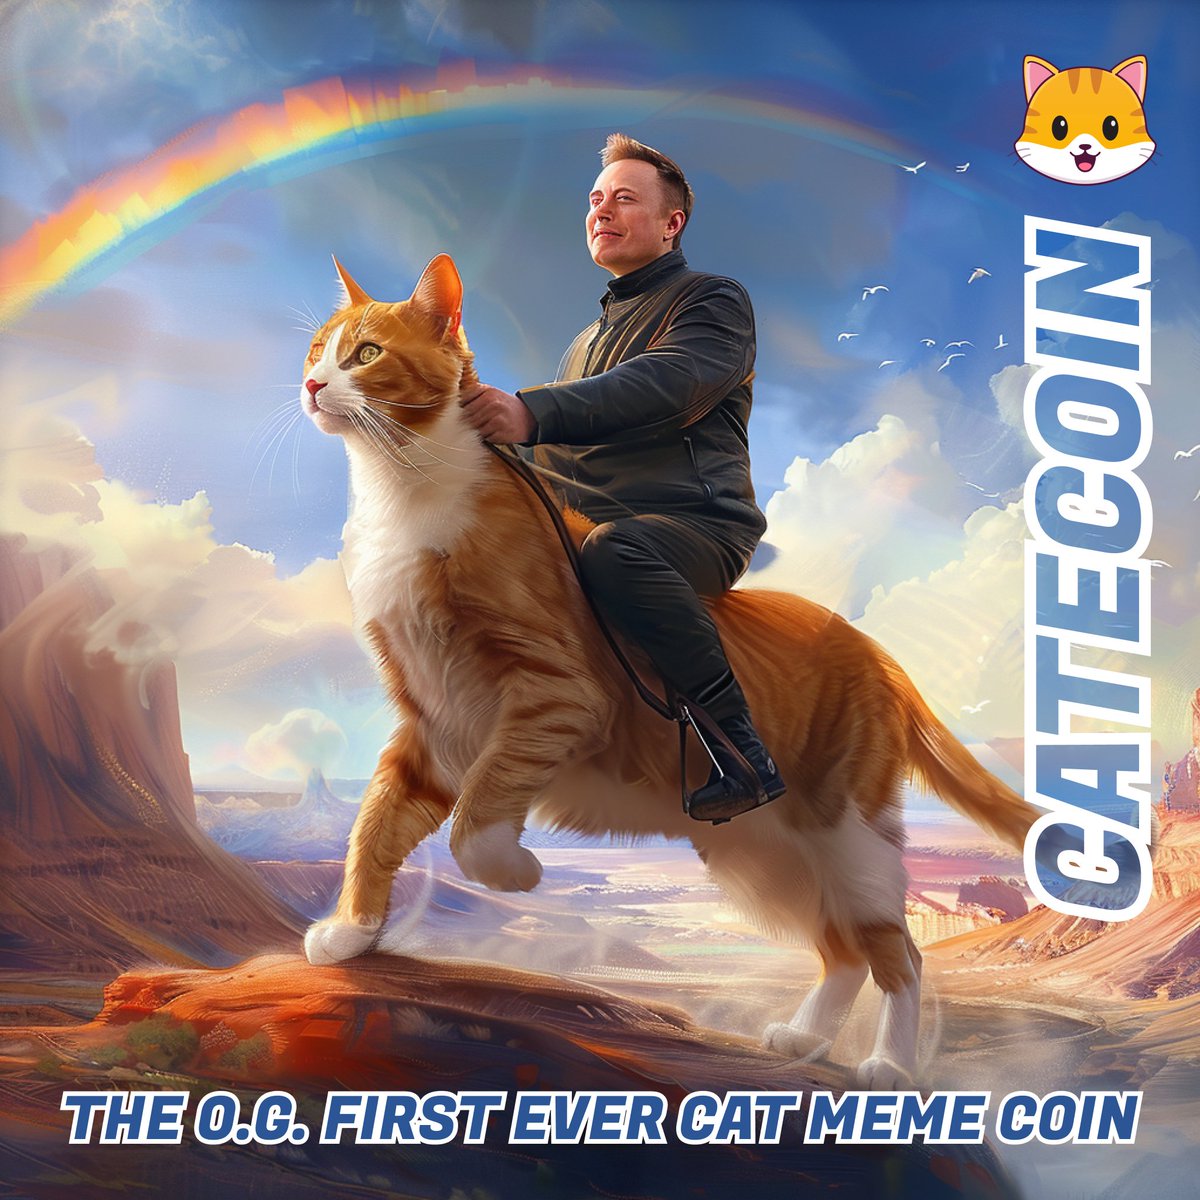 #CateCoin - Innovating memes since 2021 😻 -> 1st cat-themed #memecoin -> 1st meme sharing platform @elonmusk Its time to pick a cat... $CATE vs $DOGE